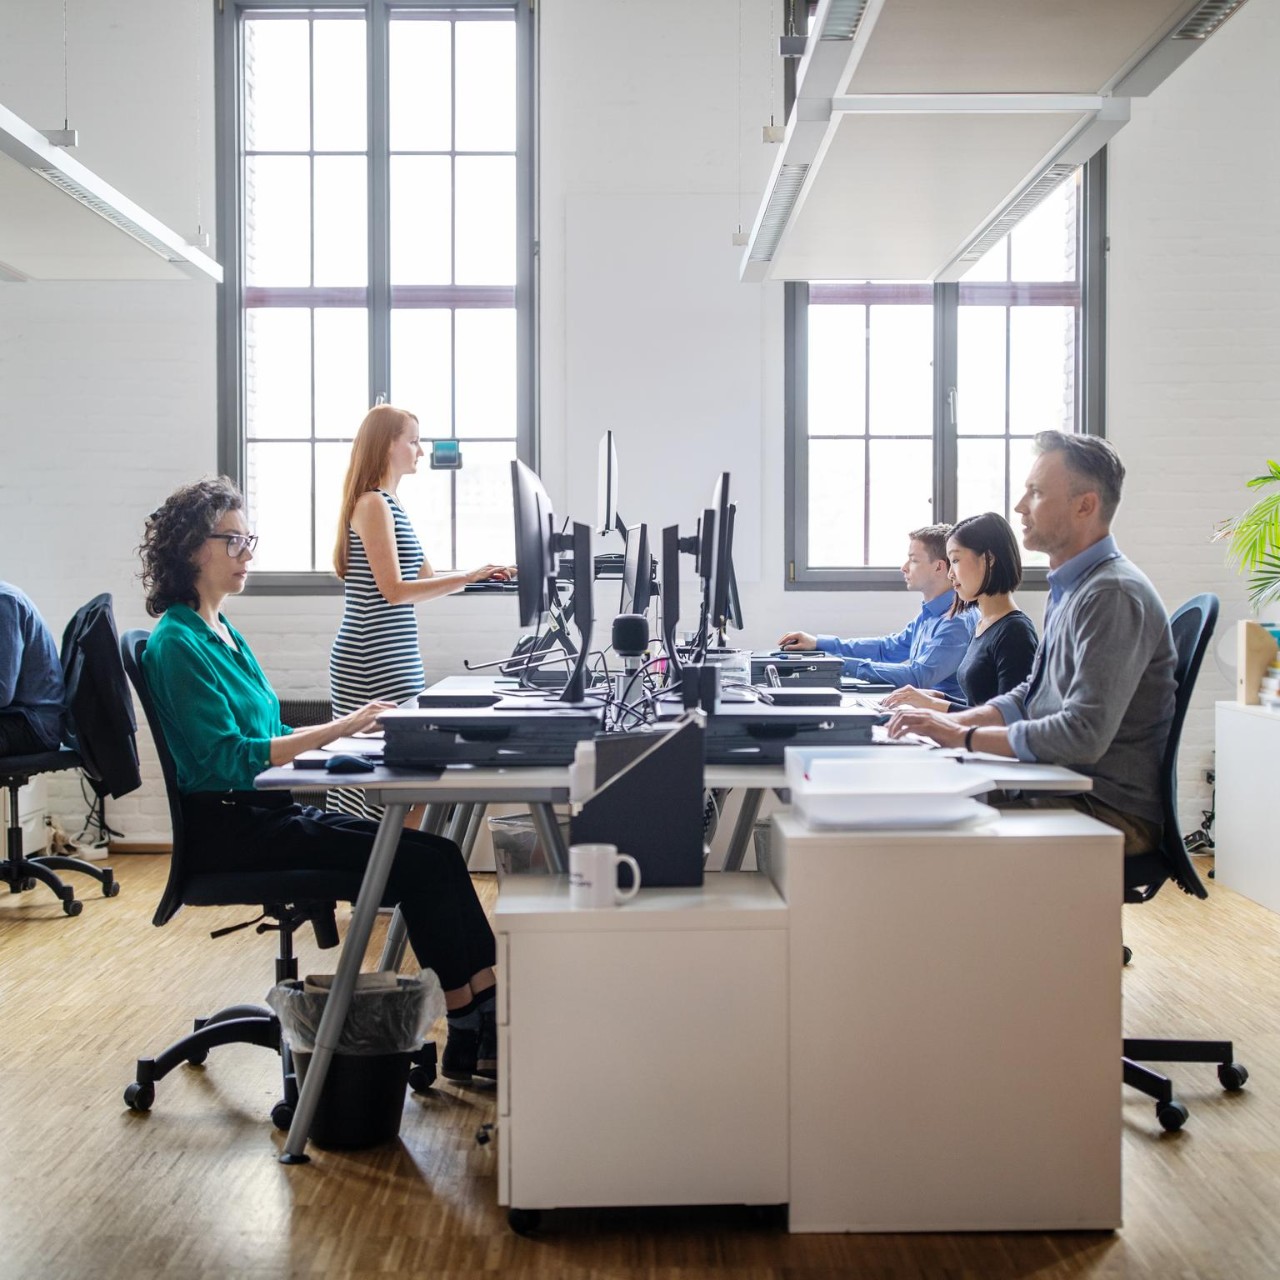 Business people at their desks in a busy, open plan office